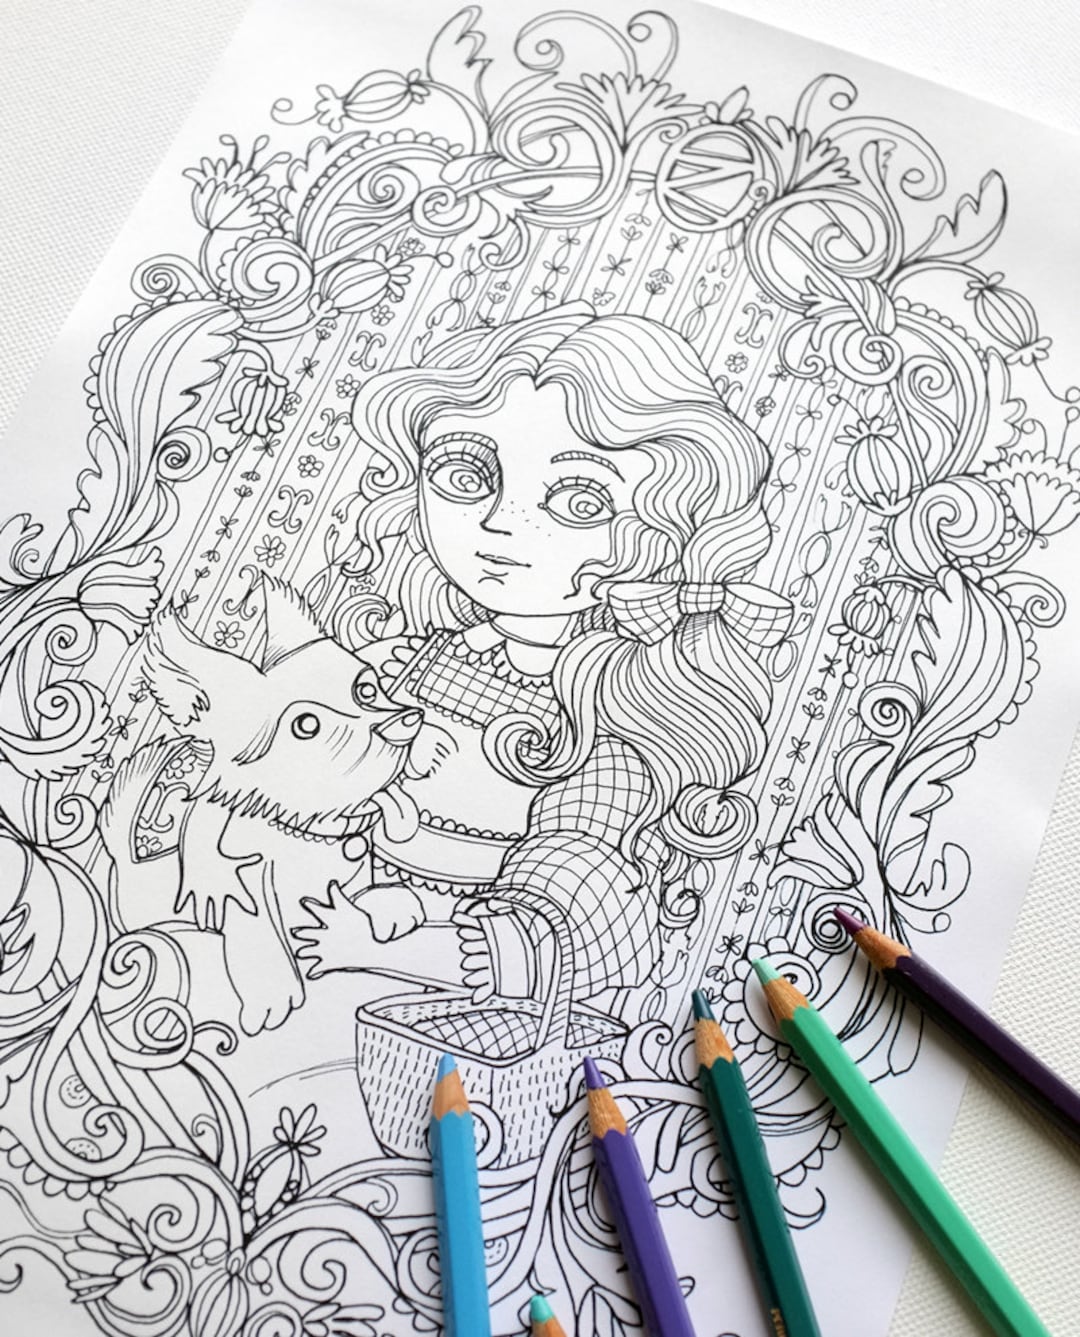 toto wizard of oz coloring page